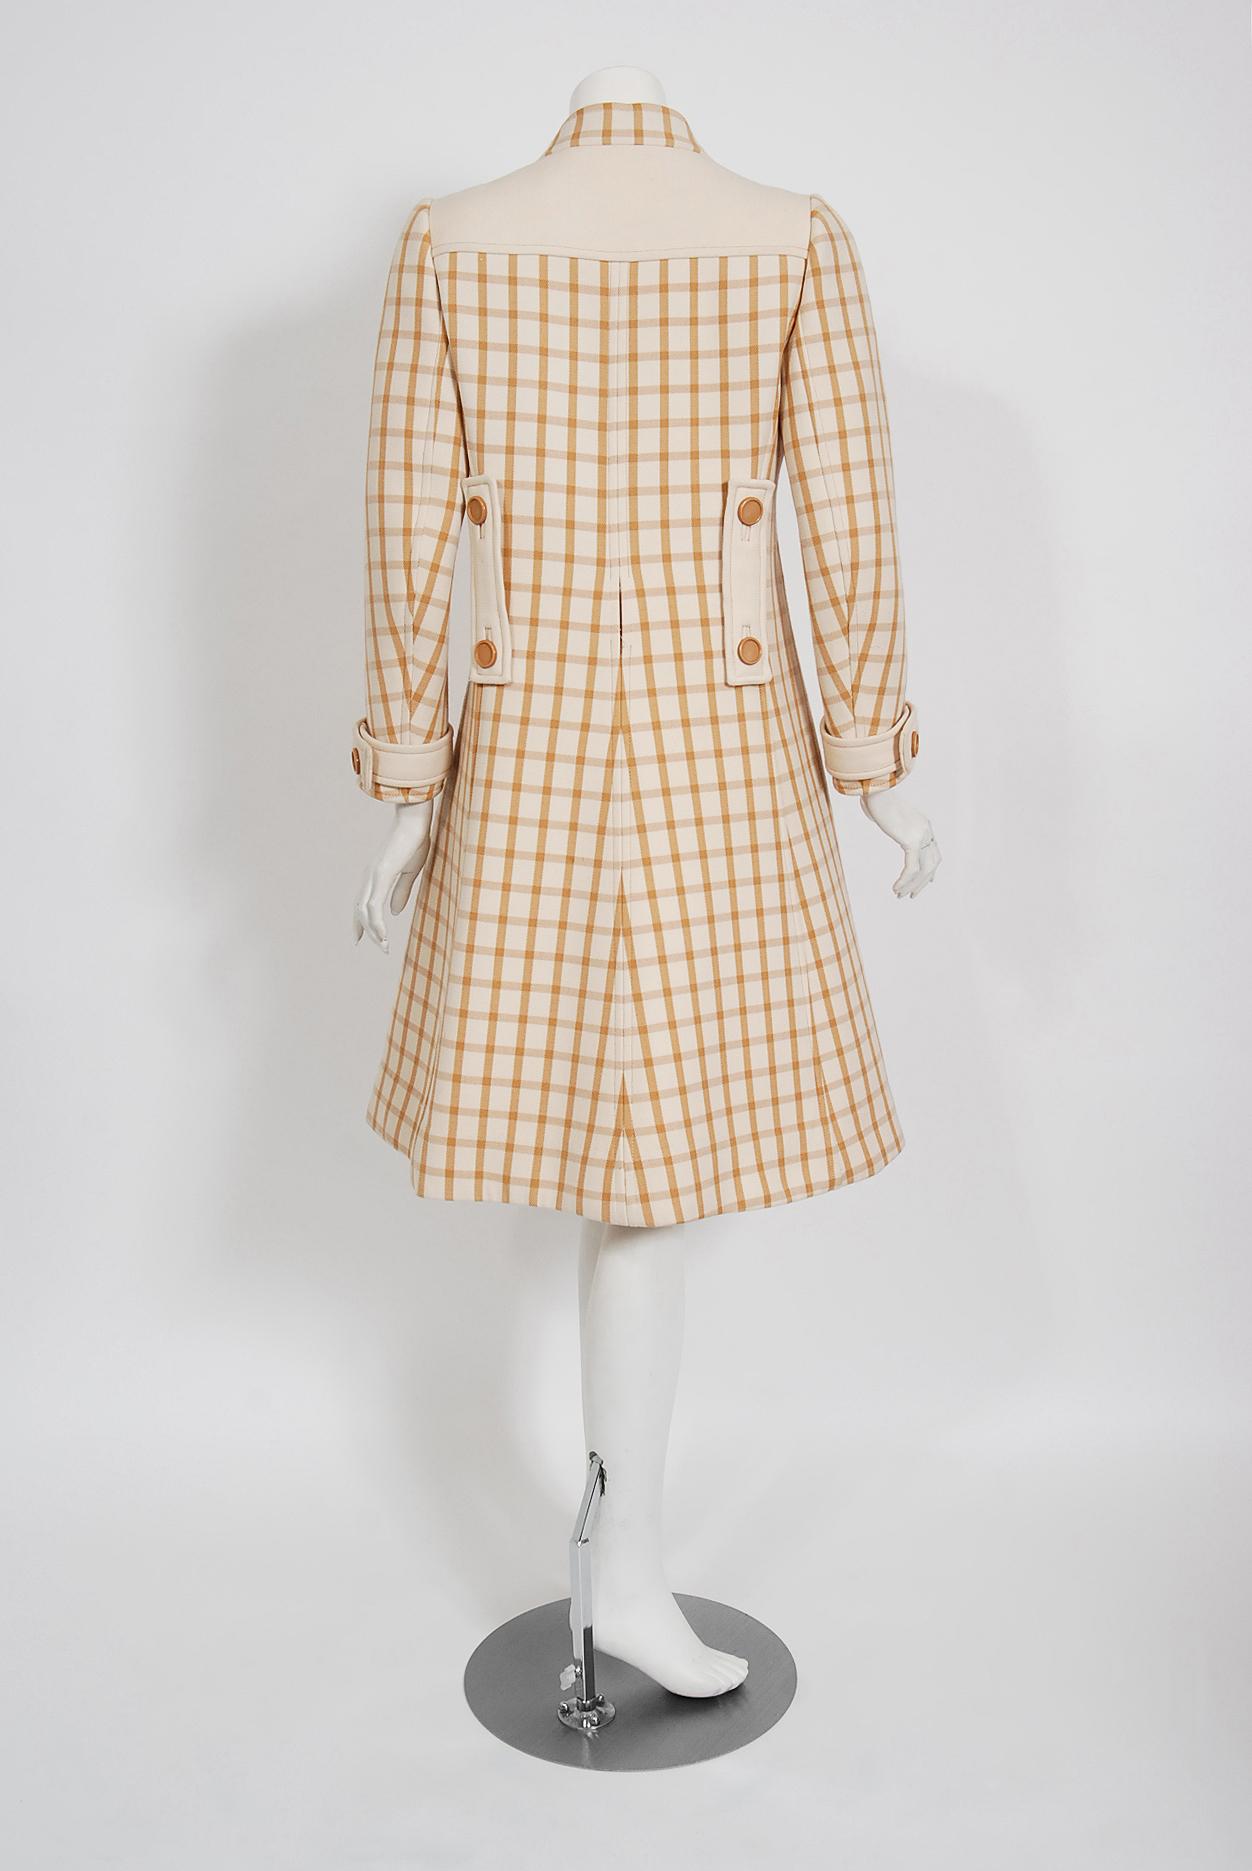 Vintage 1967 Courreges Couture Tan and Ivory Checkered Wool Mod Jacket Coat   1